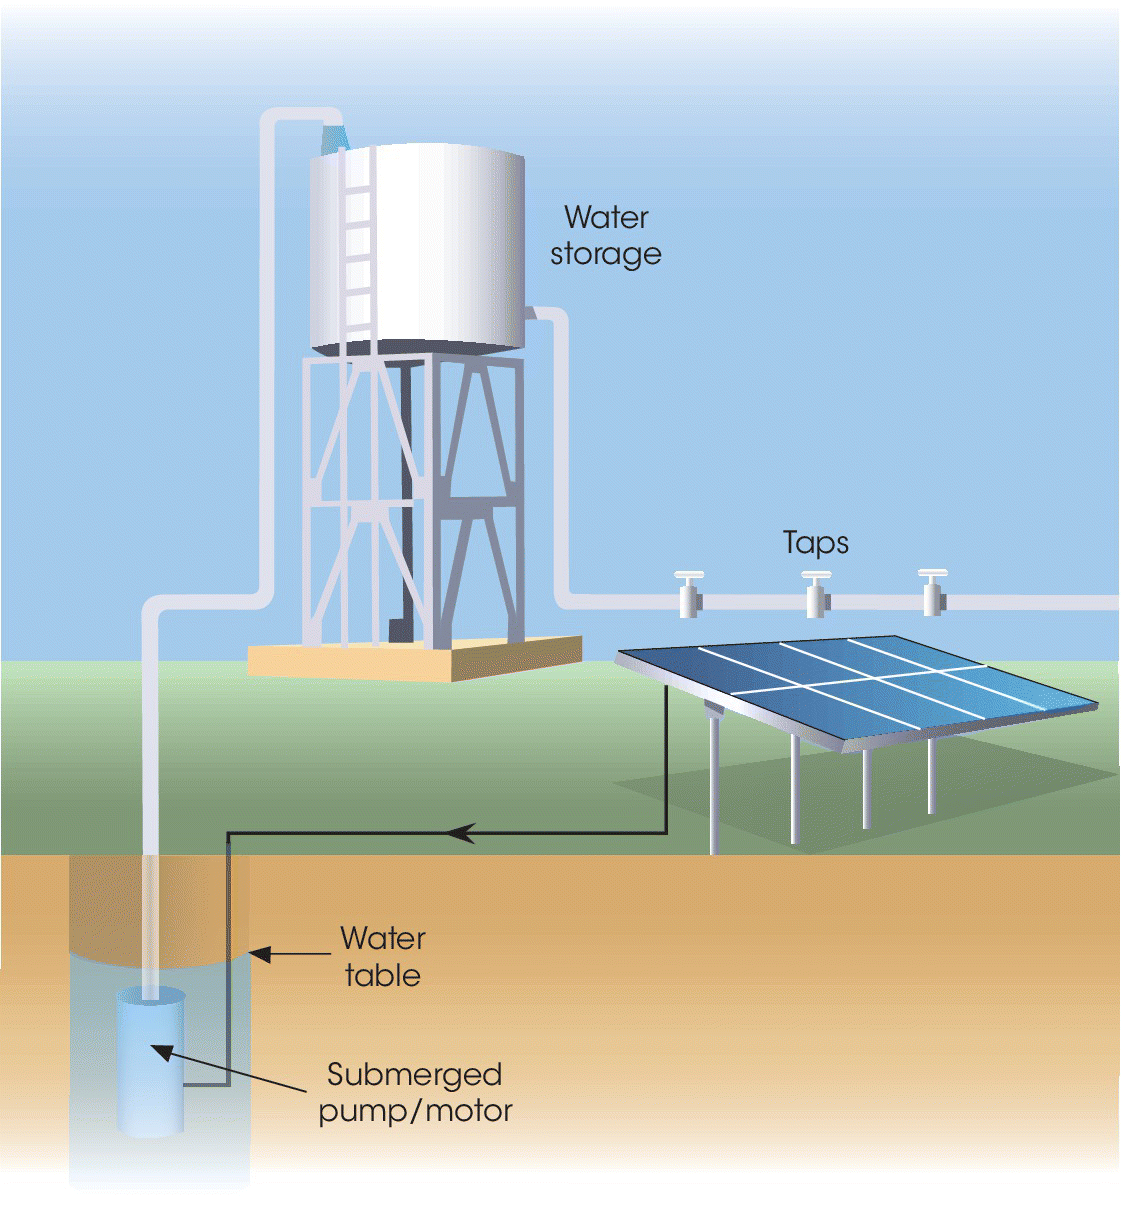 Diagram of a system for village water supply with water storage and taps being marked. Arrows depict the water table and the submerged pump/motor.